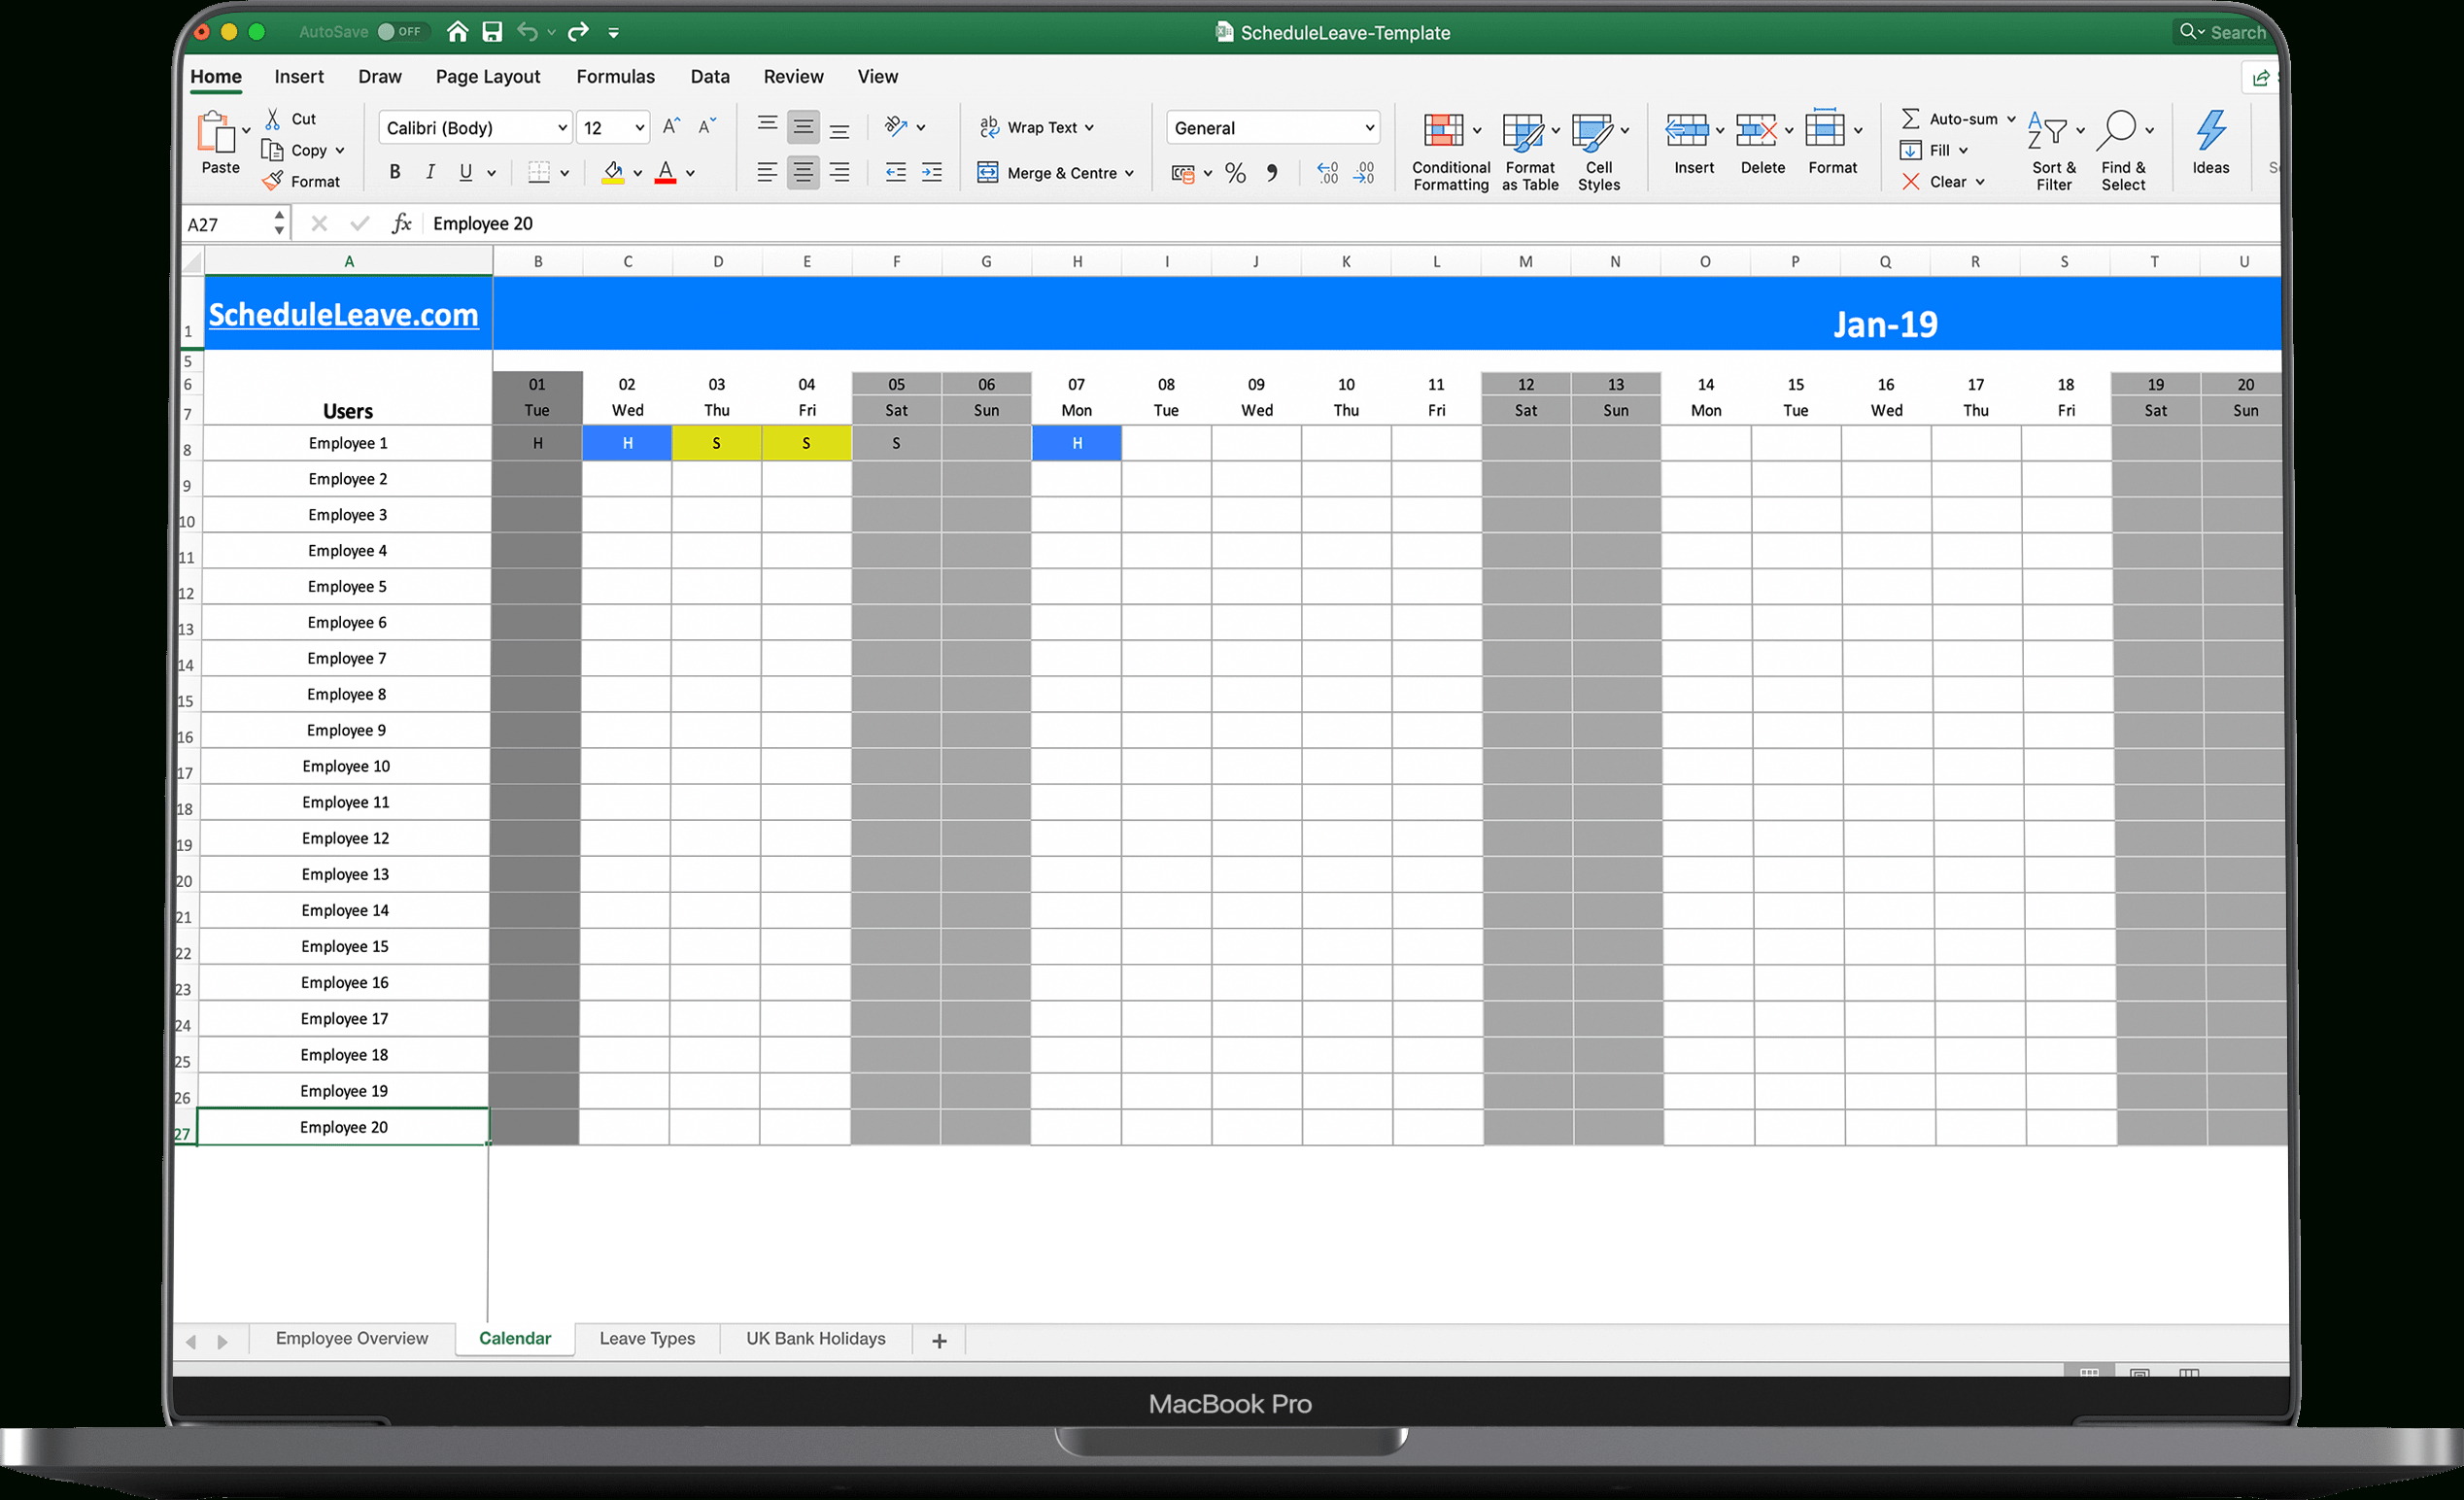 Free Excel Leave Calendar 2020 Spreadsheet Template-2021 Vacation Planner For Tem